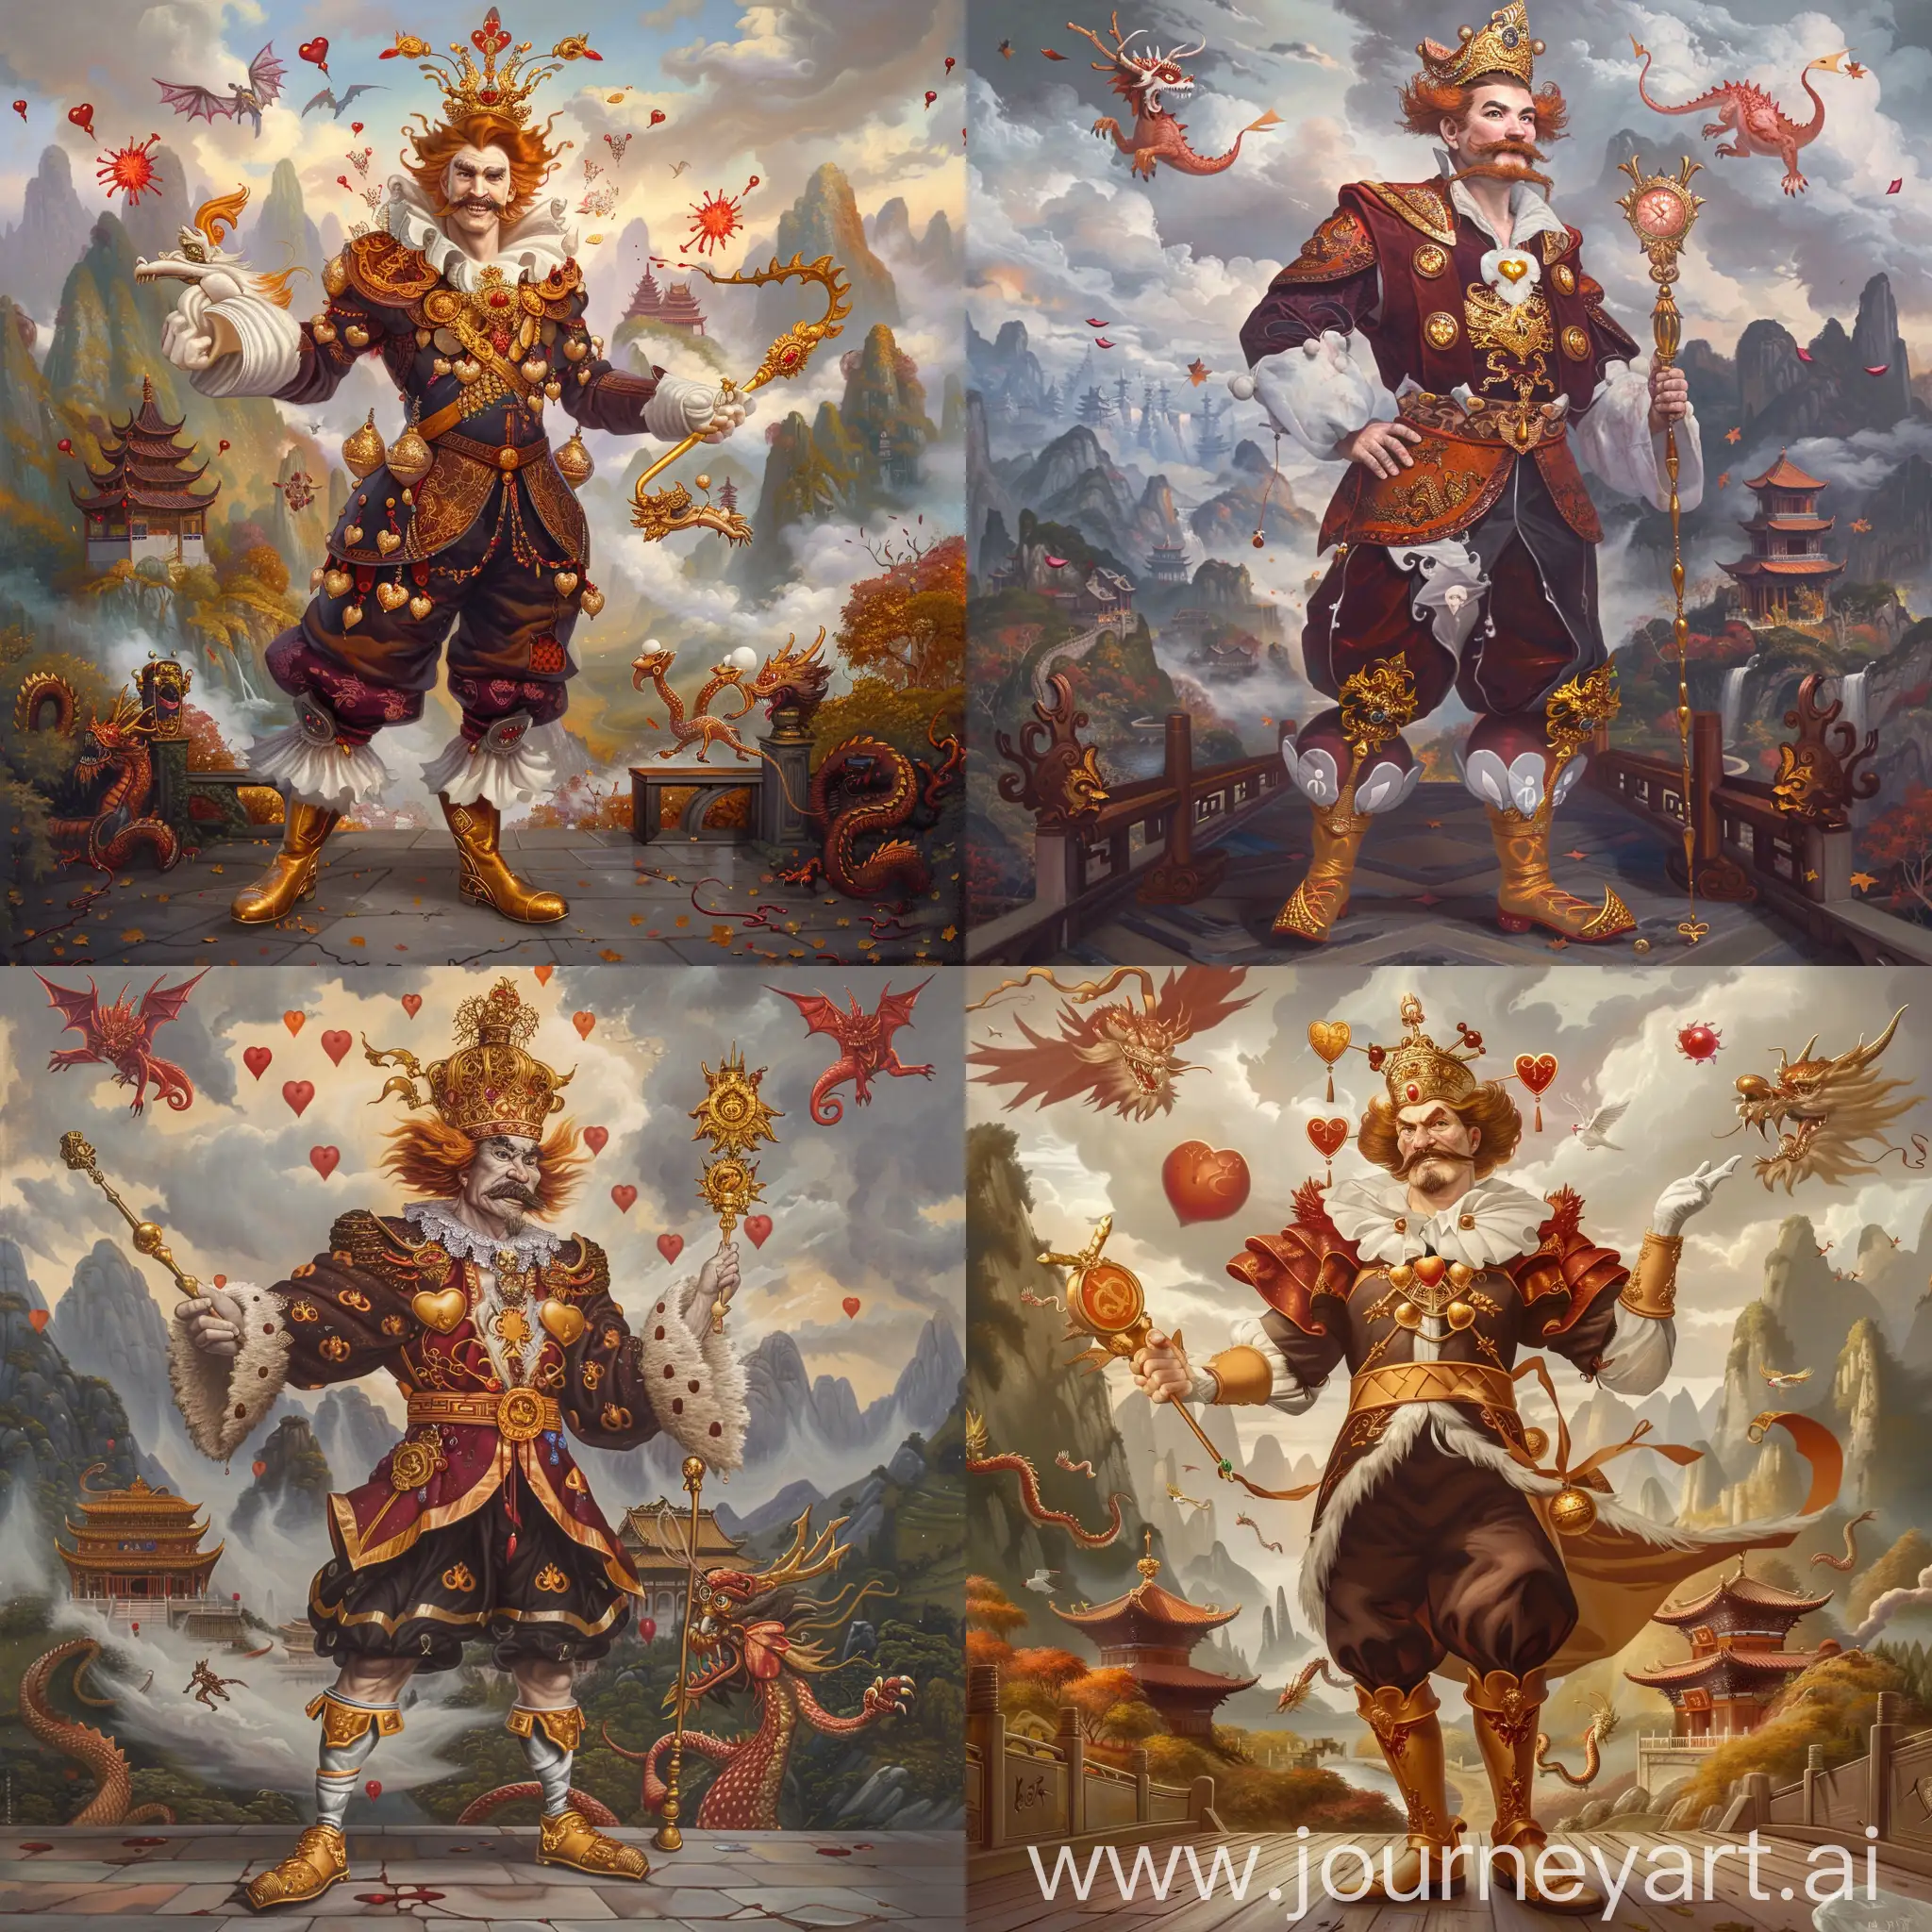 Sinister-King-of-Hearts-in-Chinese-Emperor-Attire-with-Golden-Dragon-Wand